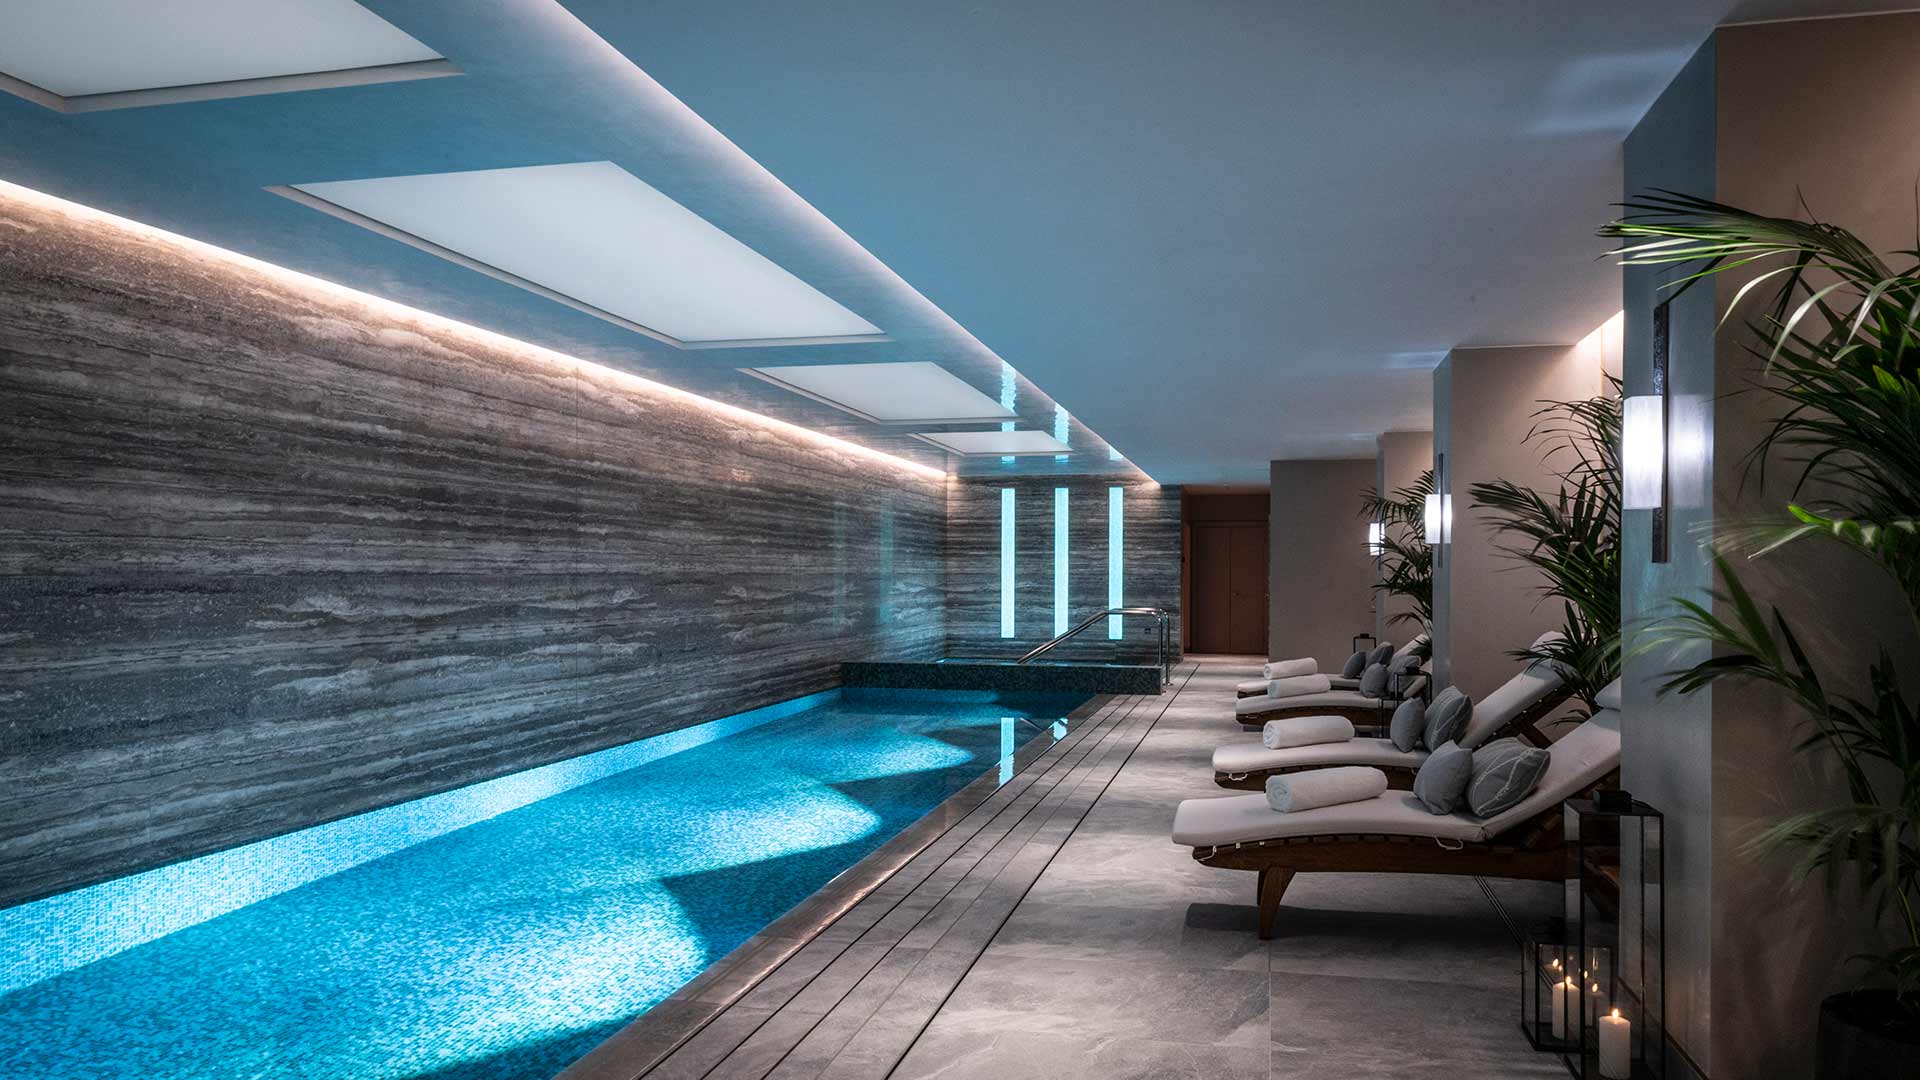 Architectural Lighting Design Swimming Pool Artificial Skylight Cove Illumination Auriens Chelsea London Consultants Nulty